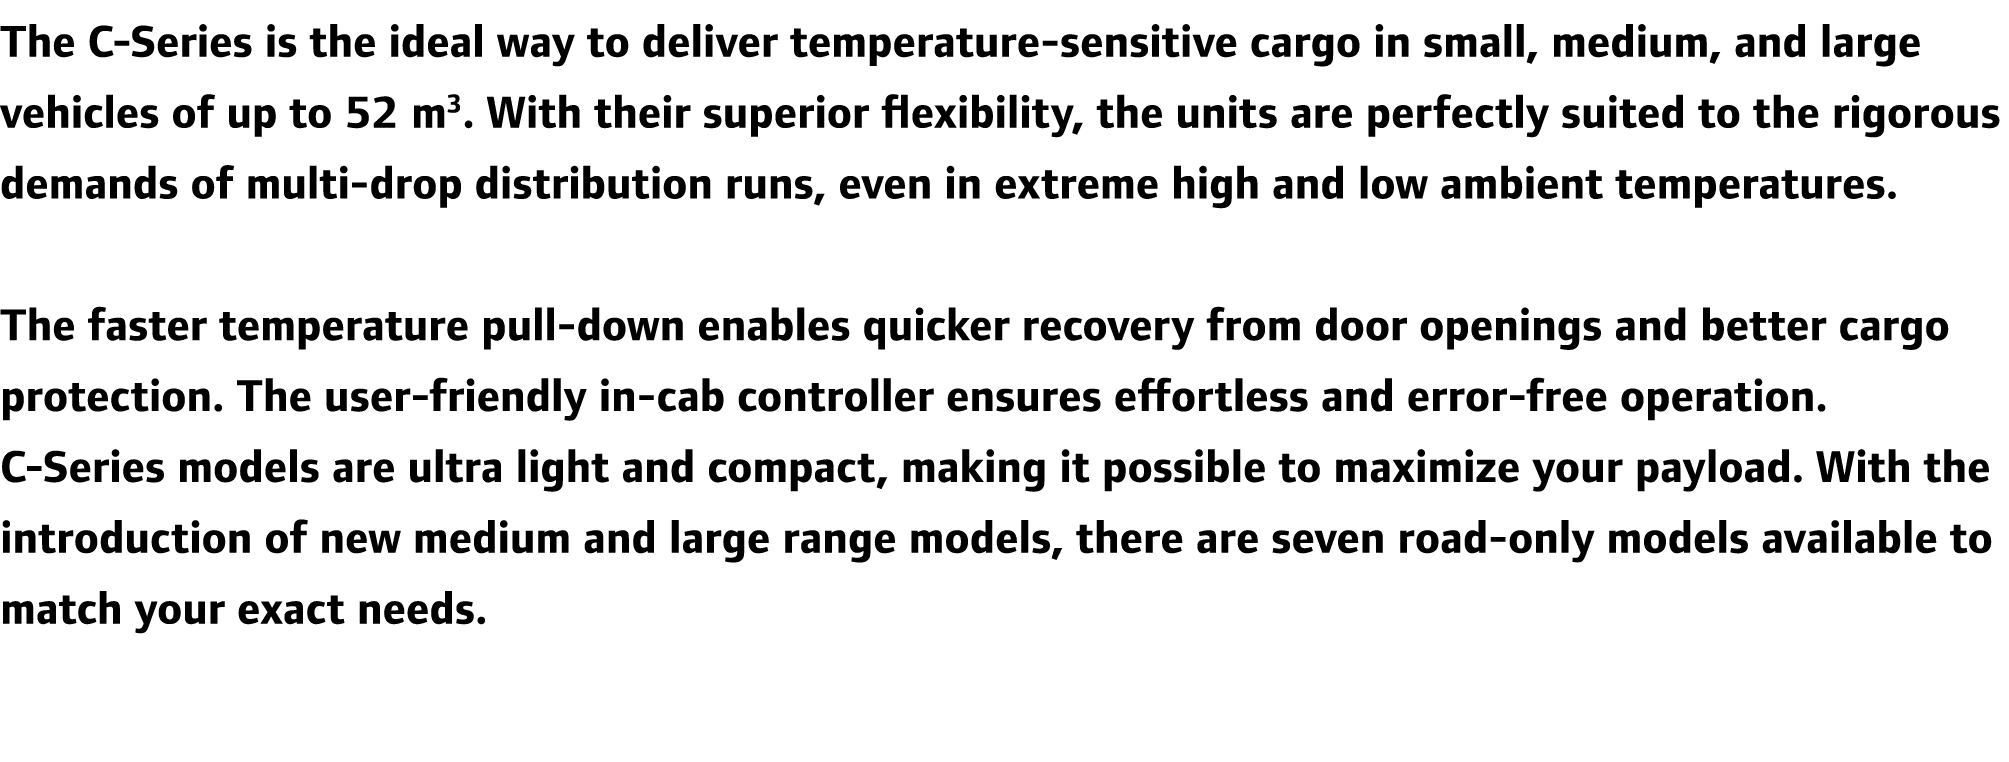 The C-Series is the ideal way to deliver temperature-sensitive cargo in small, medium, and large vehicles of up to 52...